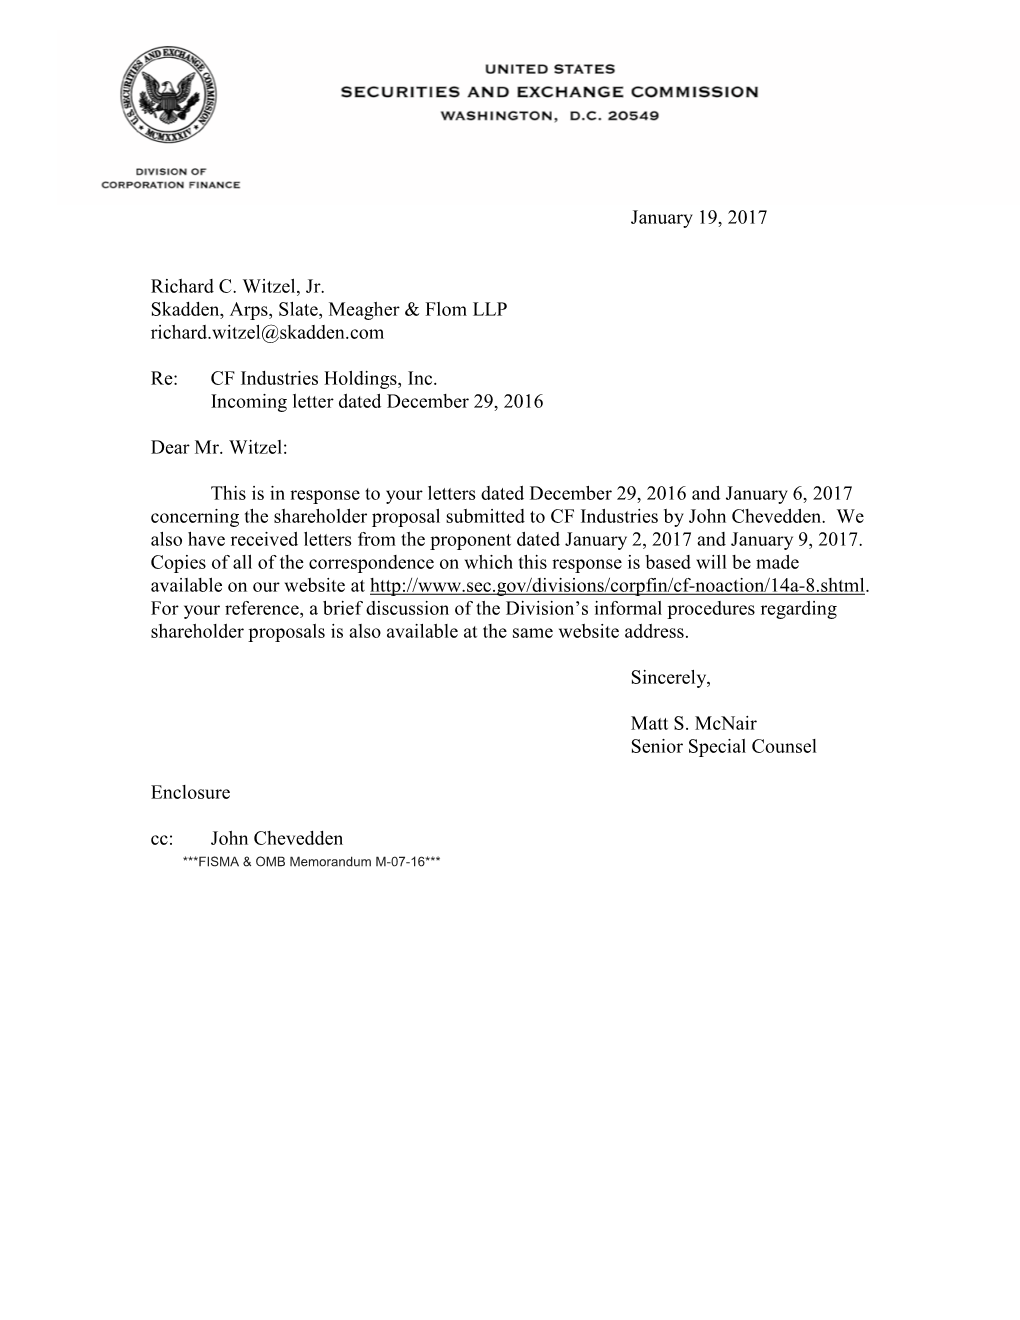 CF Industries Holdings, Inc.; Rule 14A-8 No-Action Letter